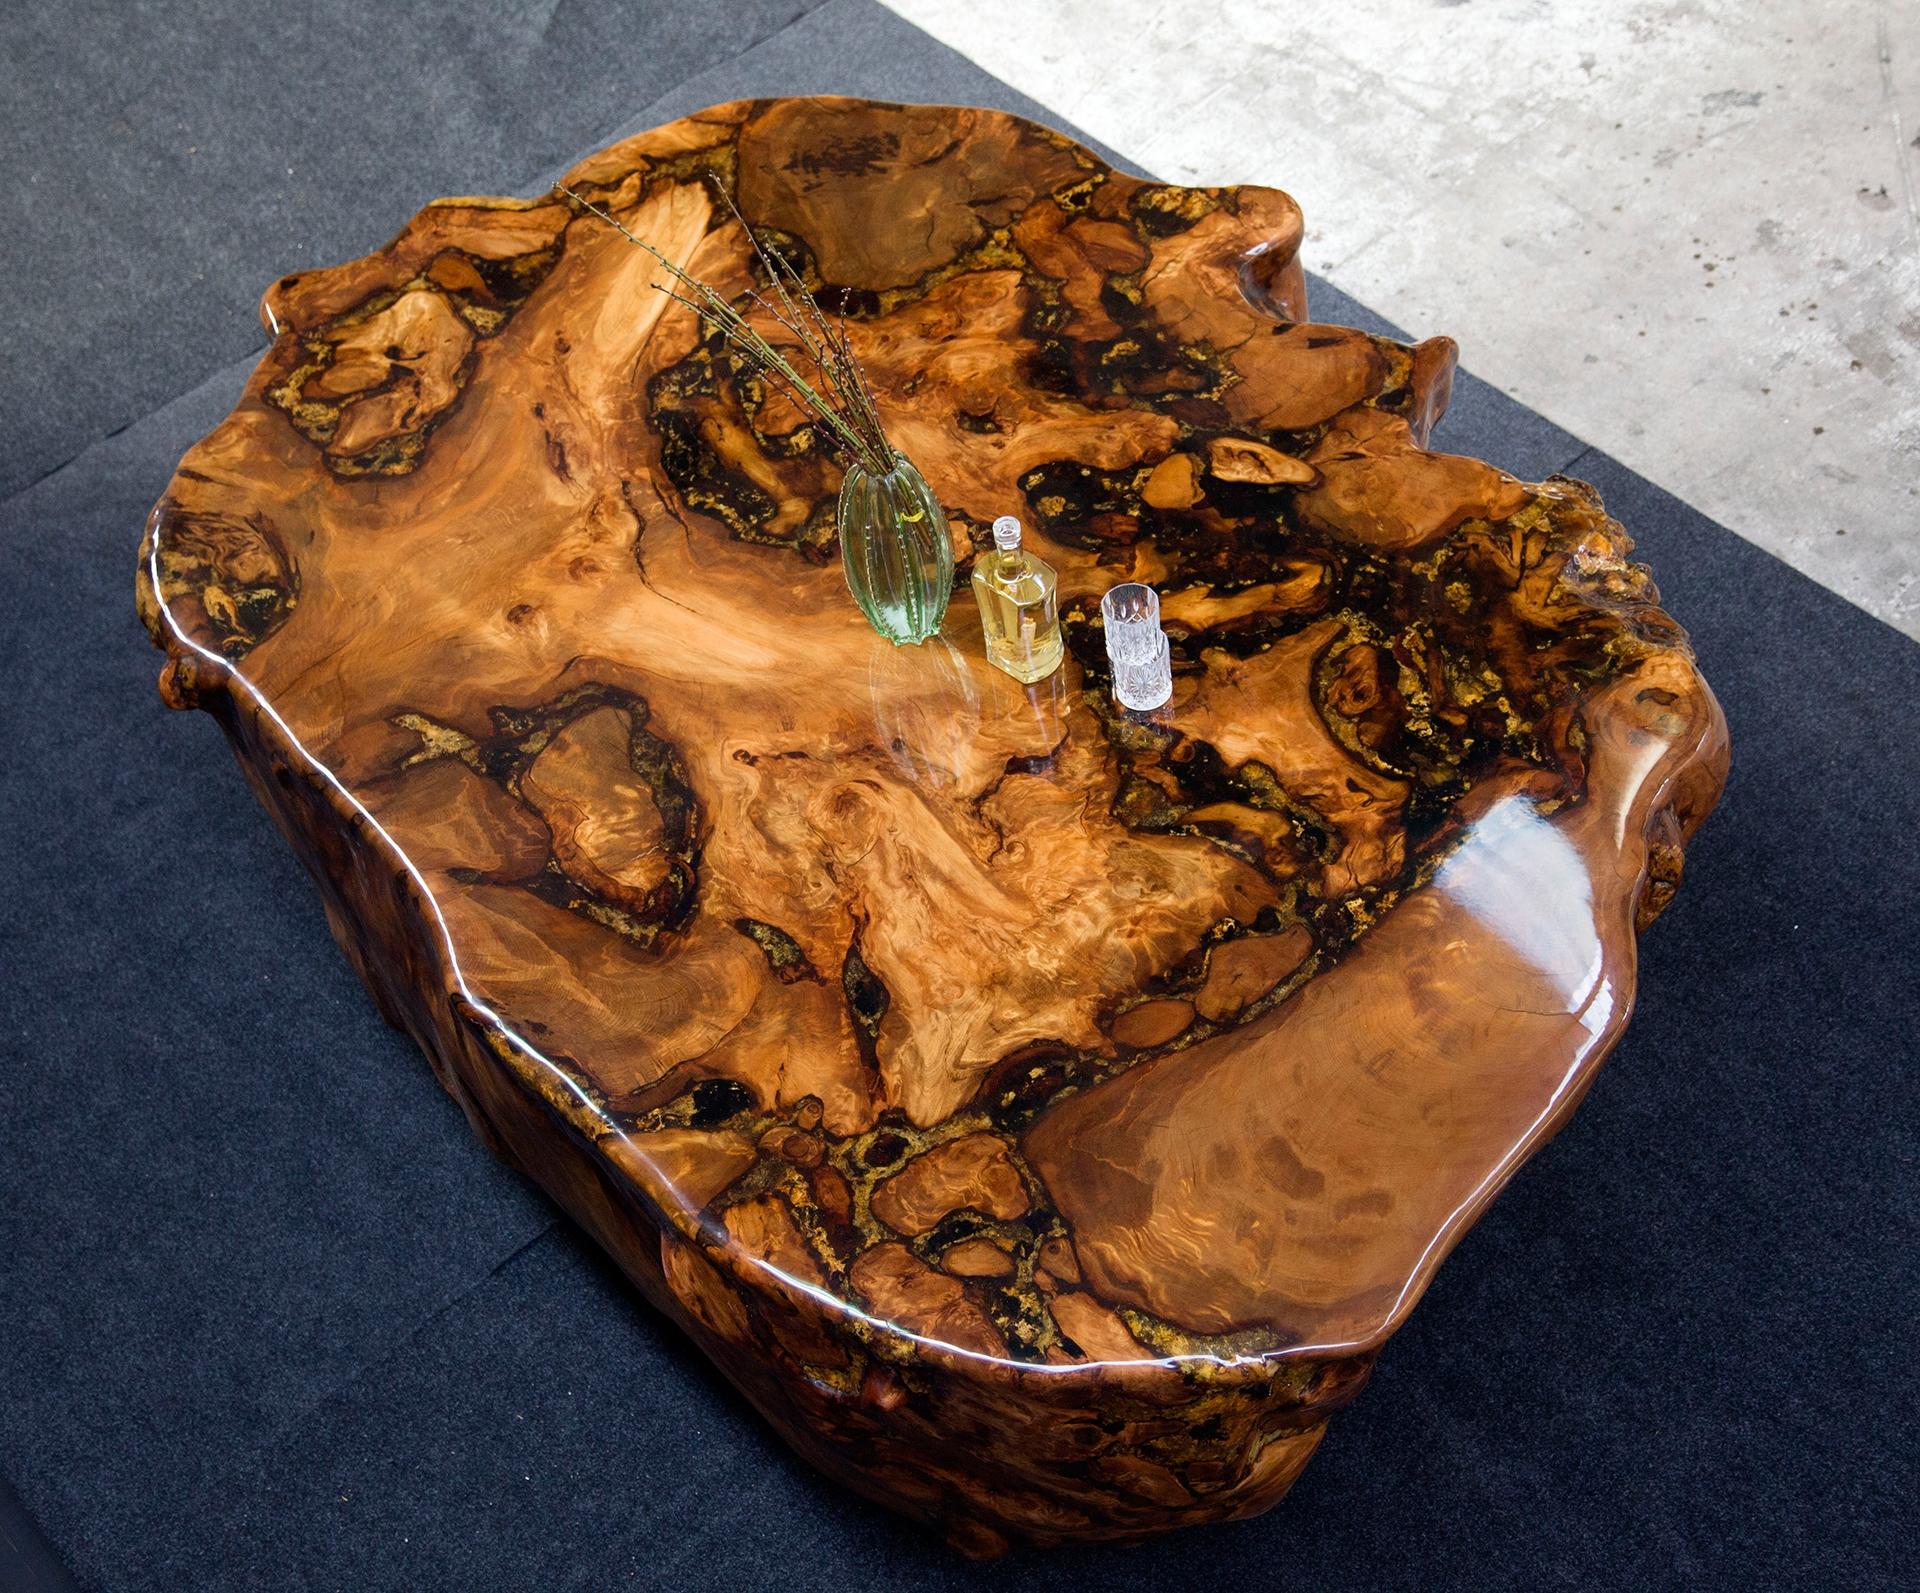 For the limited edition, THE TITANS is a series of only 12 collectable Ancient Kauri stump tables. The design of THE TITANS takes inspiration from Greek mythology that preceded the Olympians. They were the children of the primordial deities Uranus